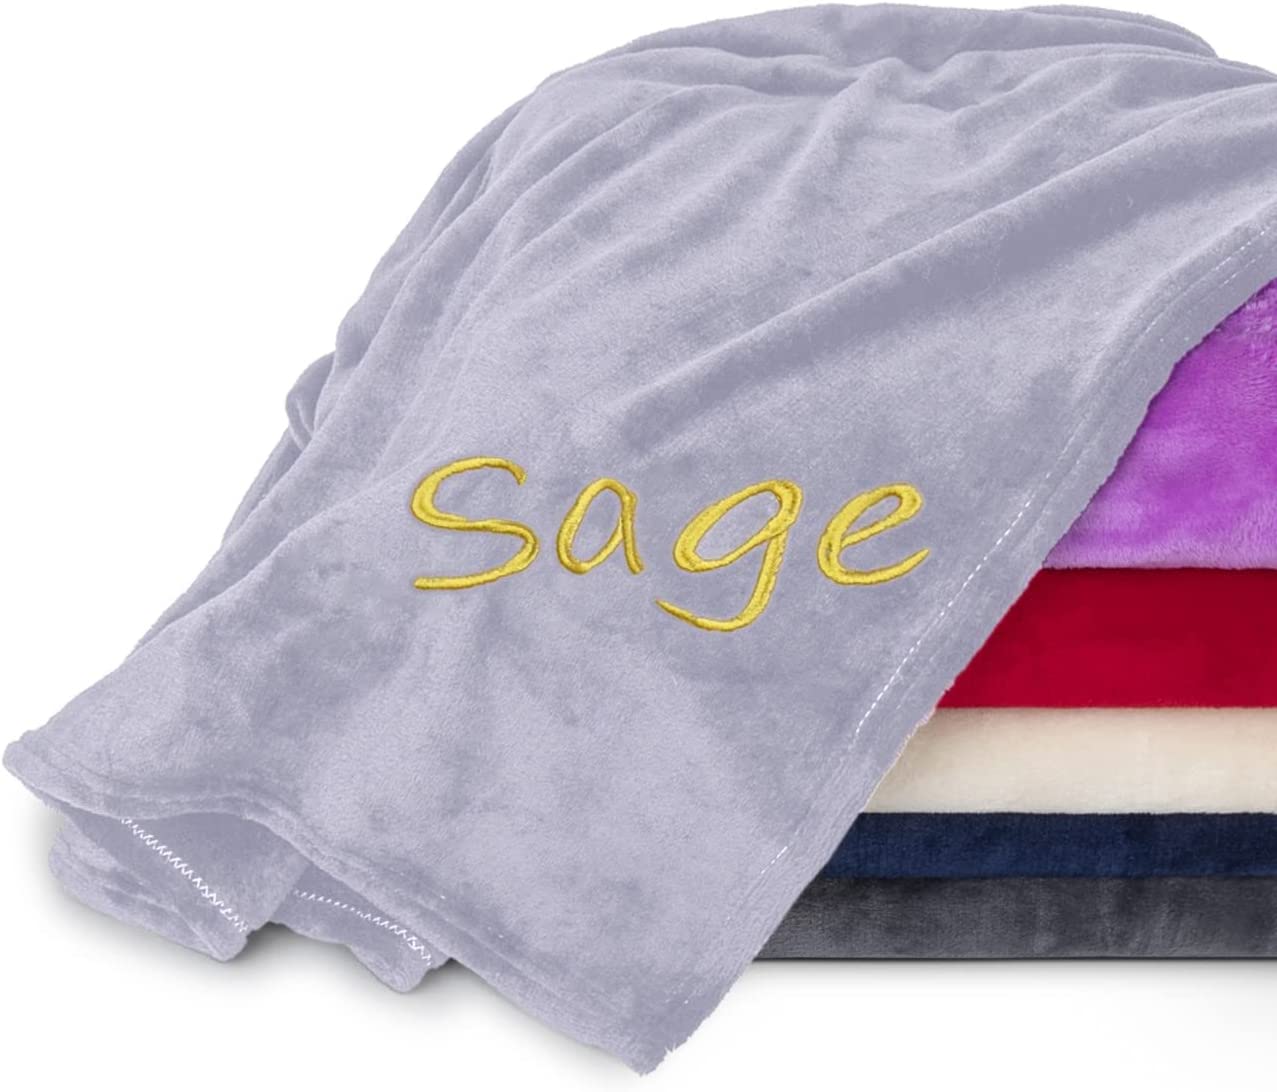 Personalized Blankets for Adults with Embroidered Name in a Variety of Colors